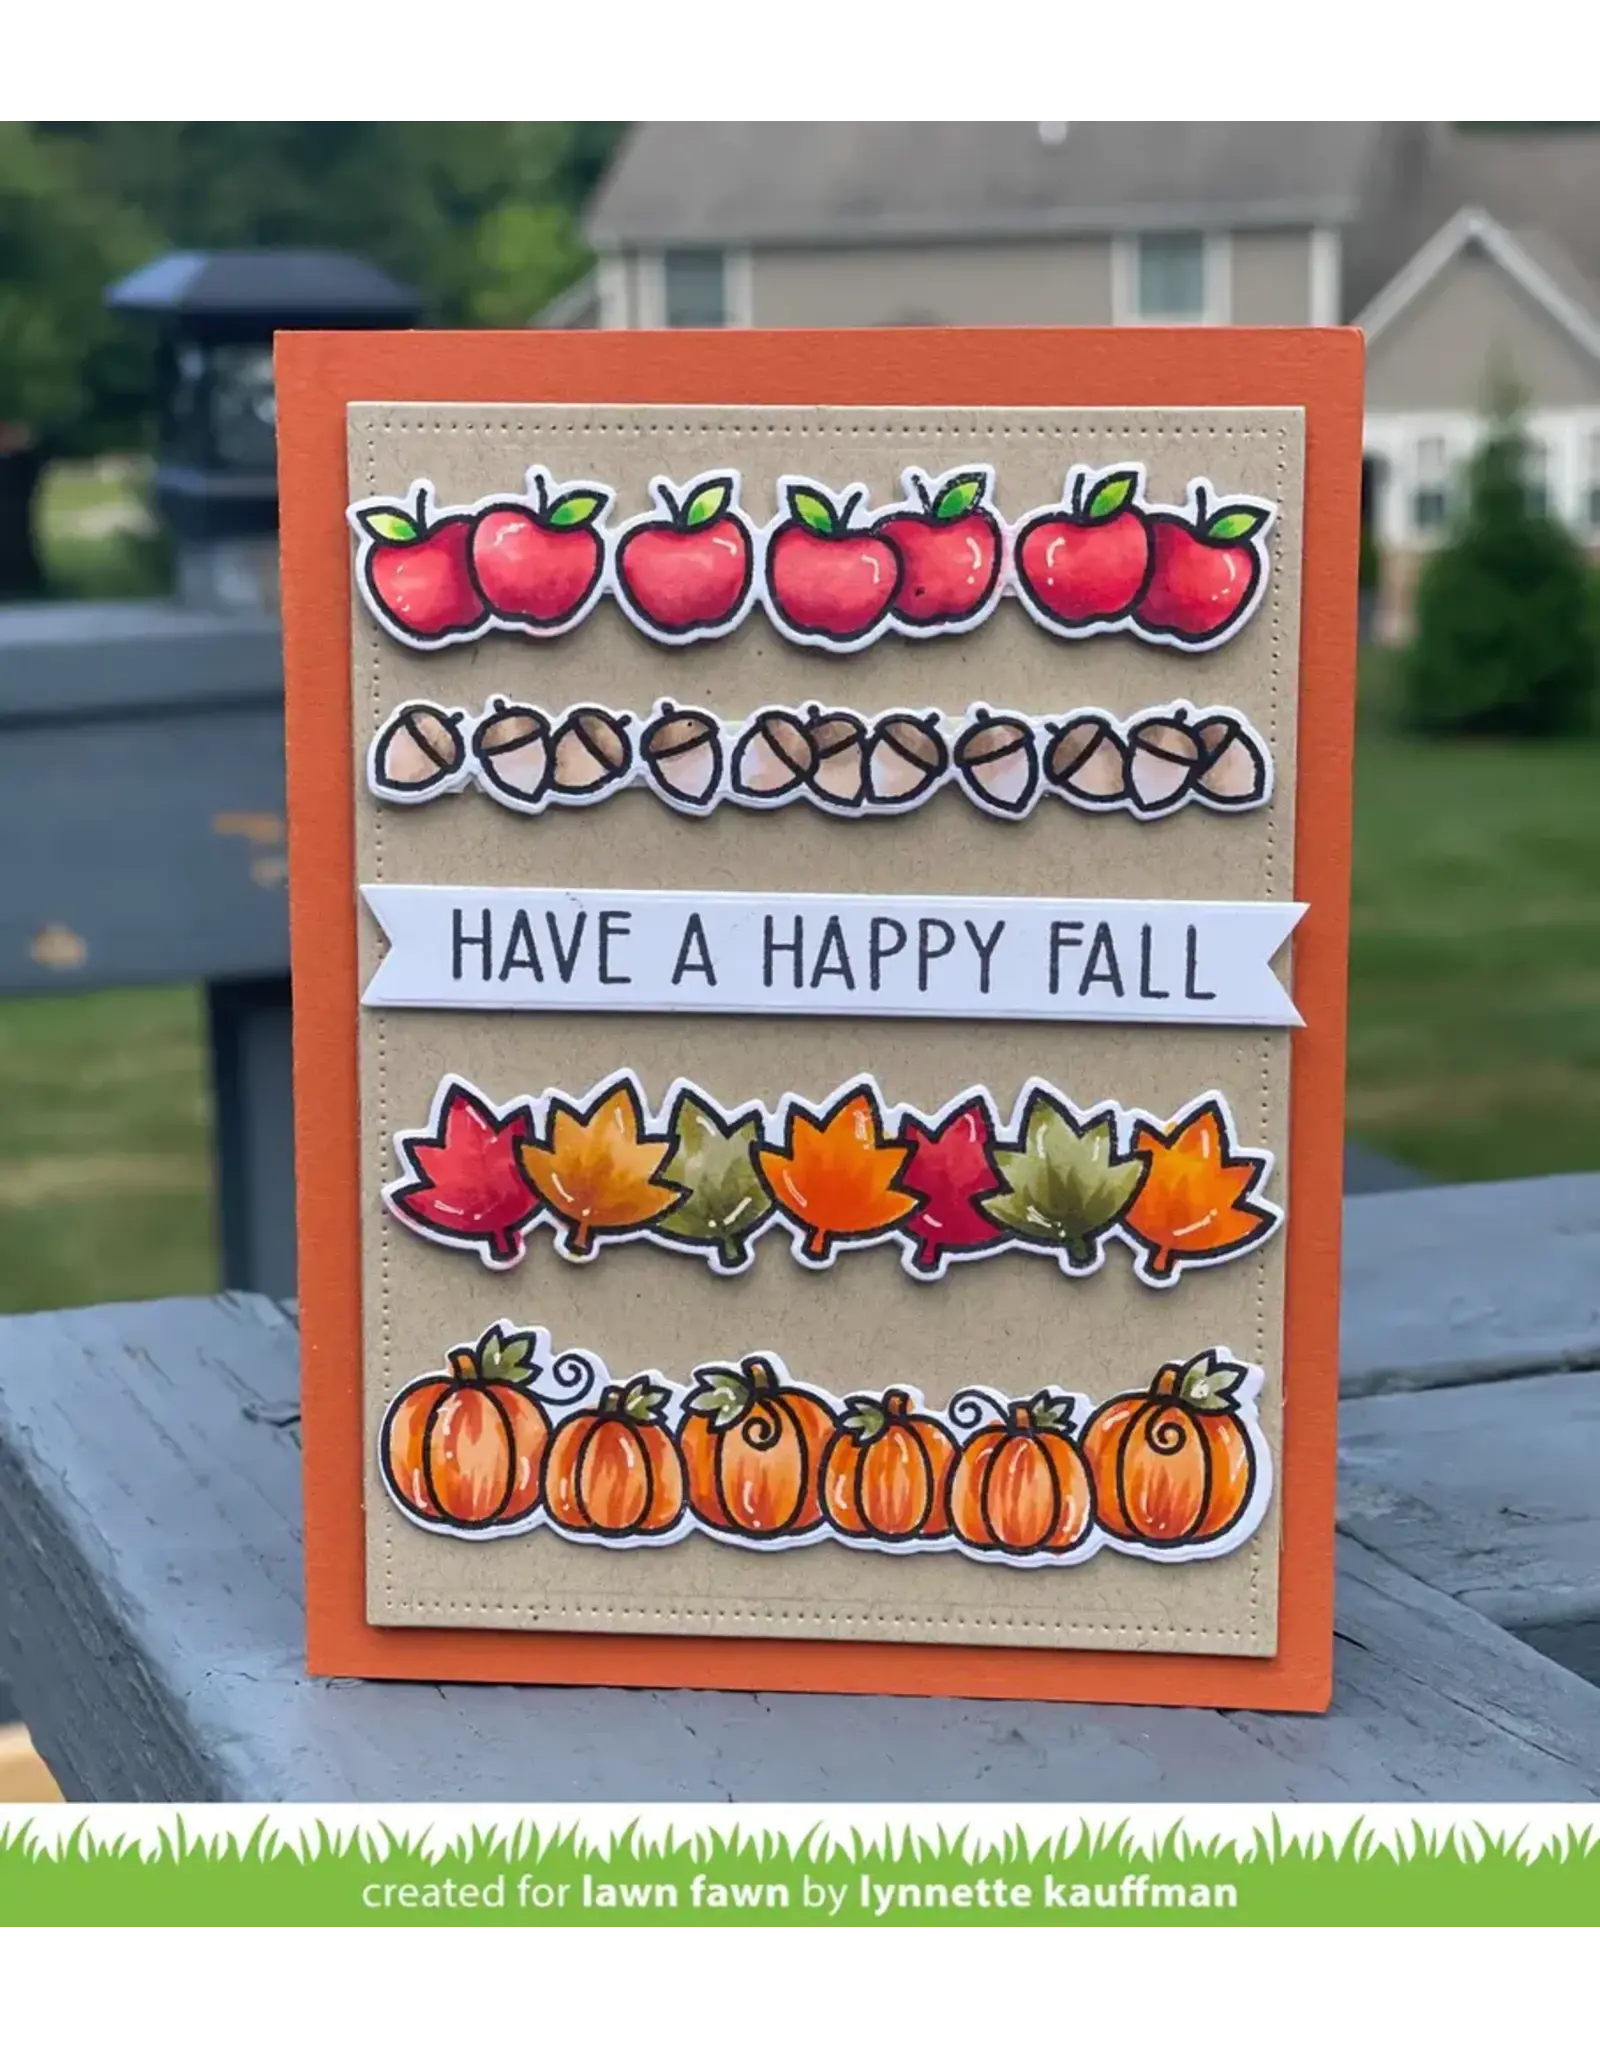 LAWN FAWN LAWN FAWN SIMPLE CELEBRATE FALL CLEAR STAMP AND DIE SET